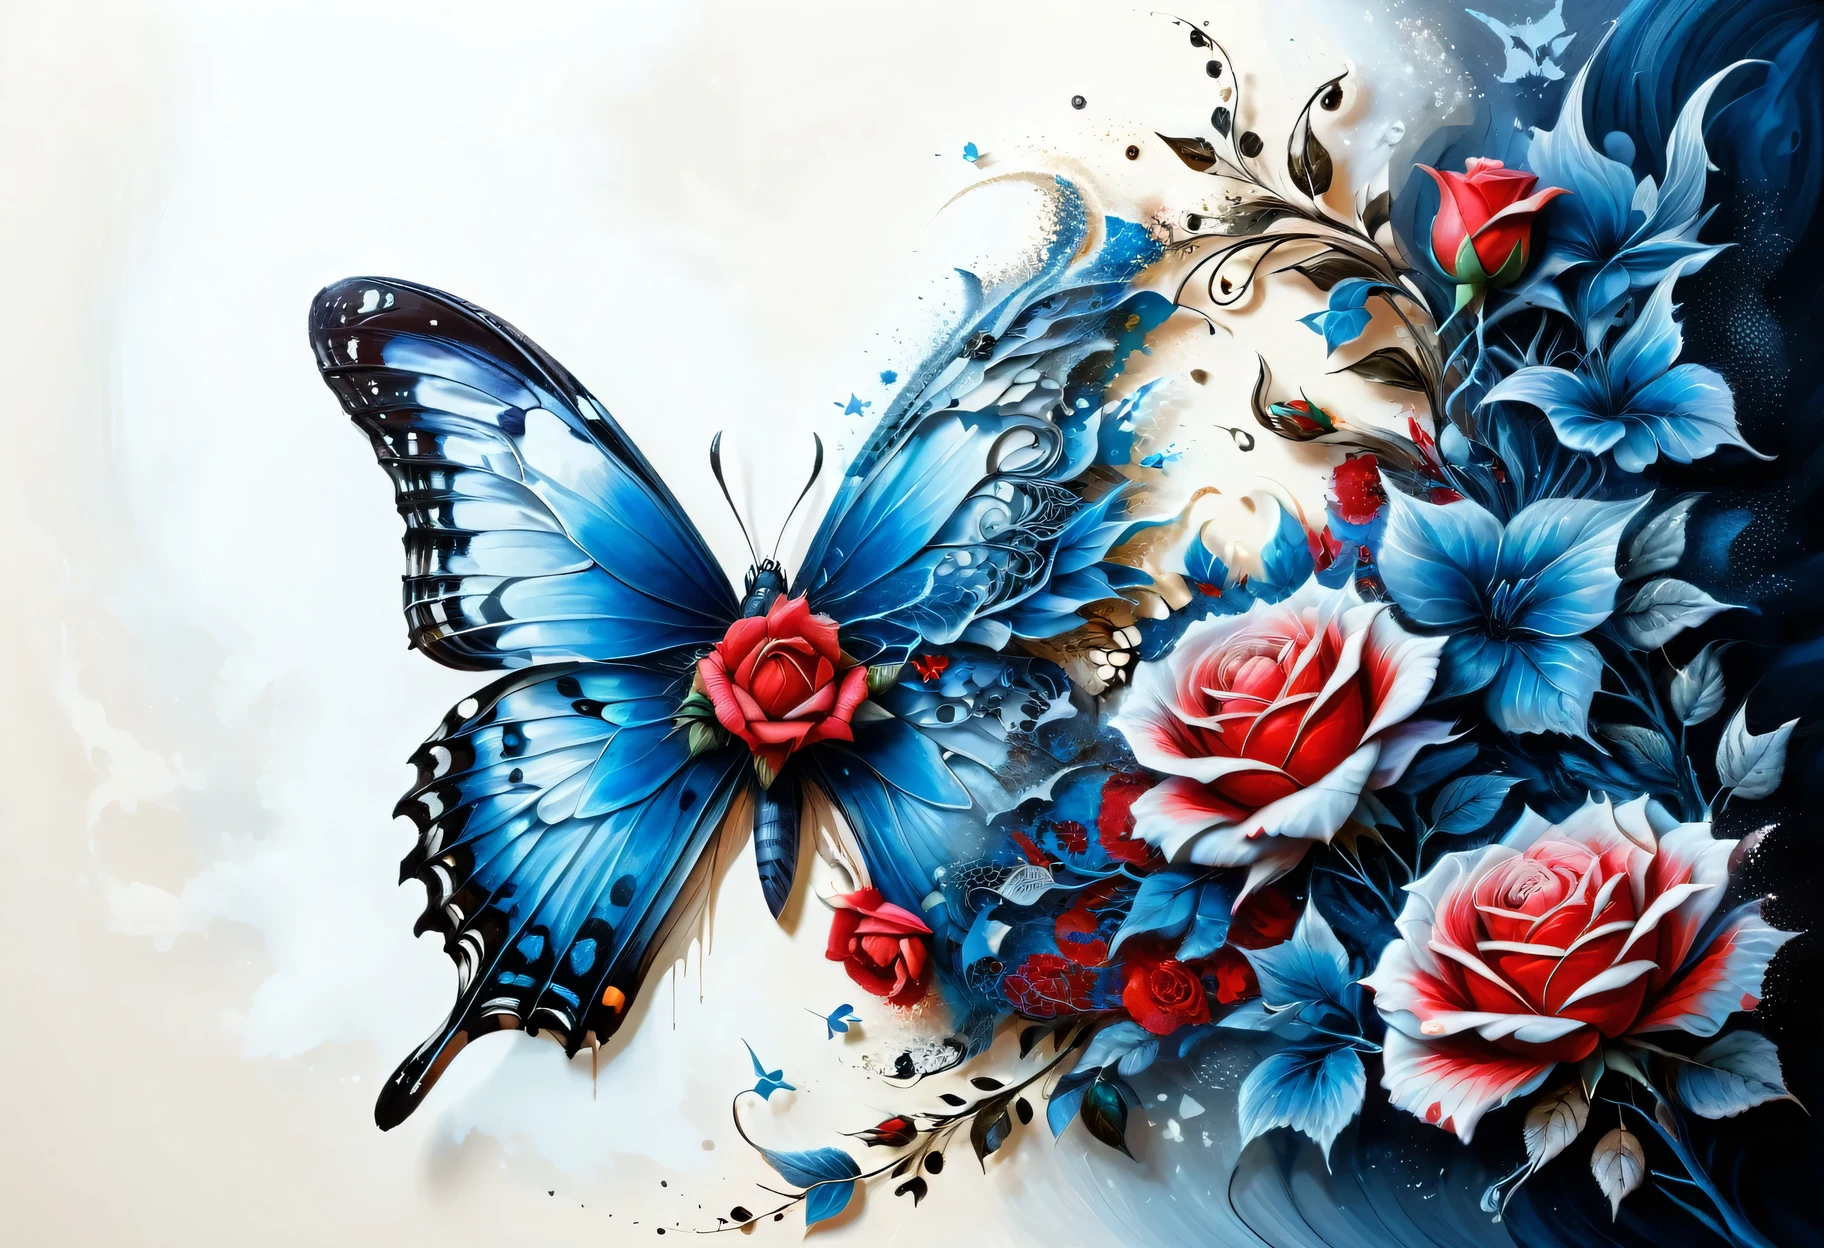 A two-layer painting with the effect of surreal volume by superimposing layers in different styles, a surreal grotesque image ((blue butterfly)) and (red rose flower) on one layer, surrounded by an elegant edging with an intricate pattern made by the second layer, the combination of two layers creates the illusion of volume, canvas, acrylic, transparency, filigree, clarity